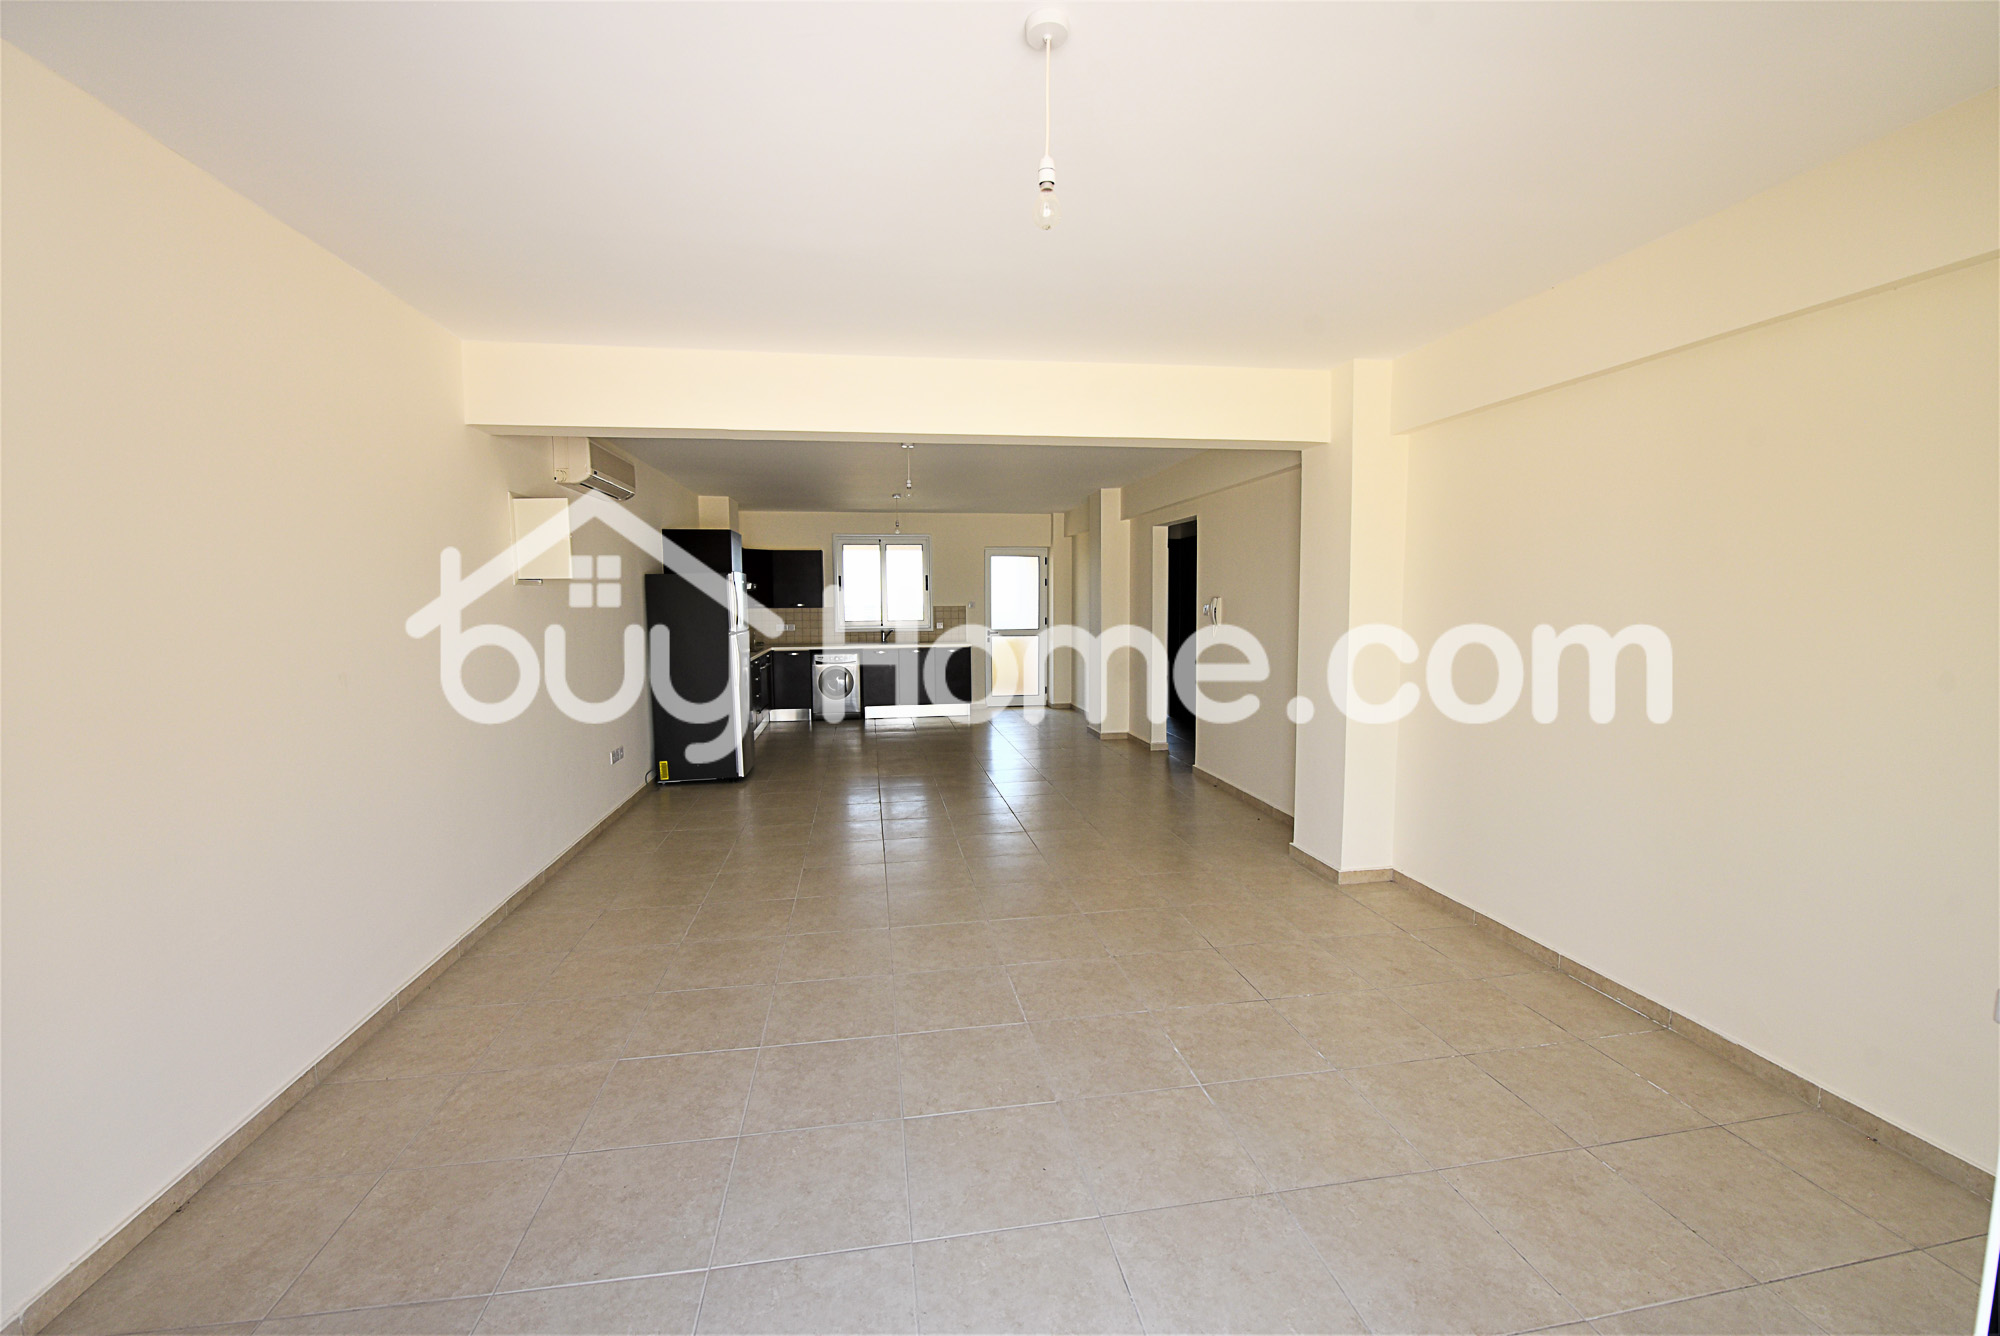 3 x 2 Bedroom Apartments for Rent | BuyHome